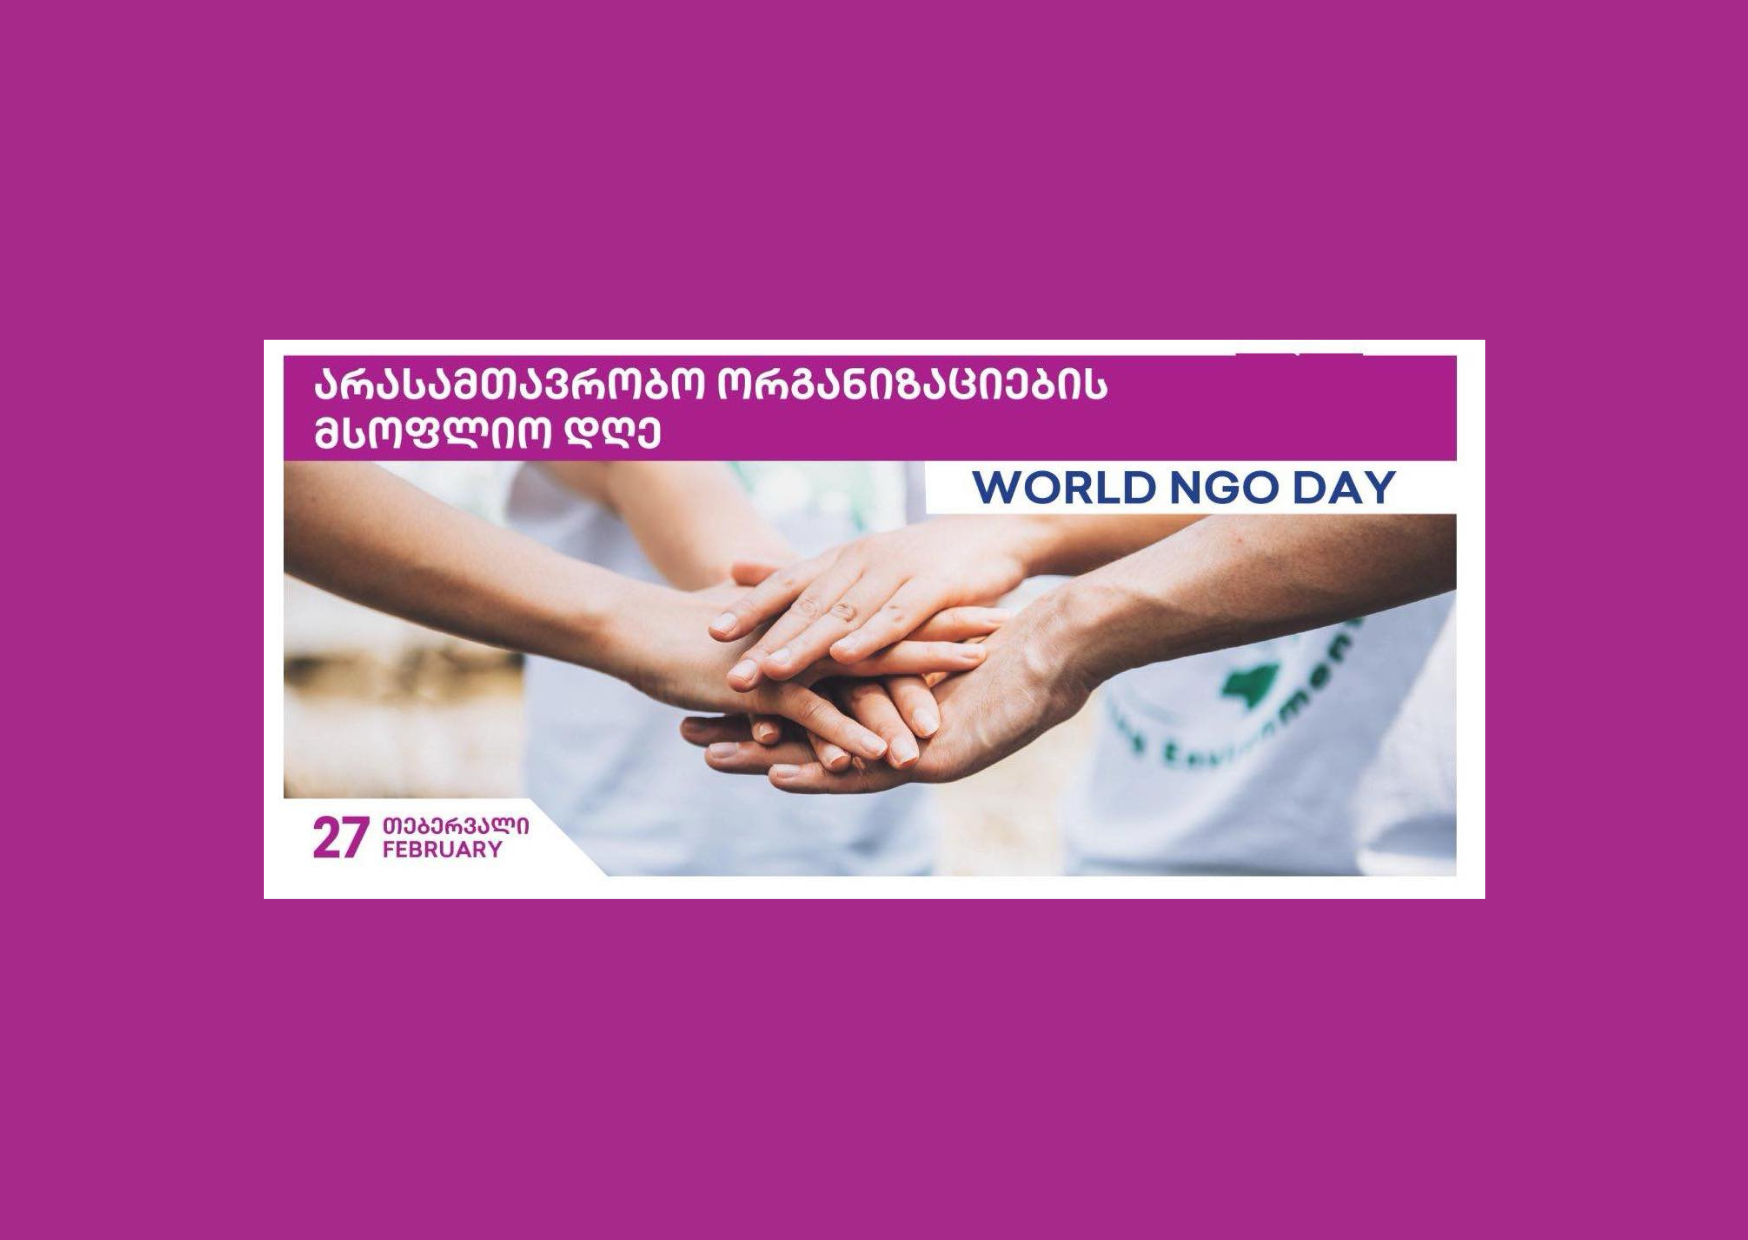 STATEMENT FOR THE WORLD NGO DAY BY THE EU AMBASSADOR TO GEORGIA